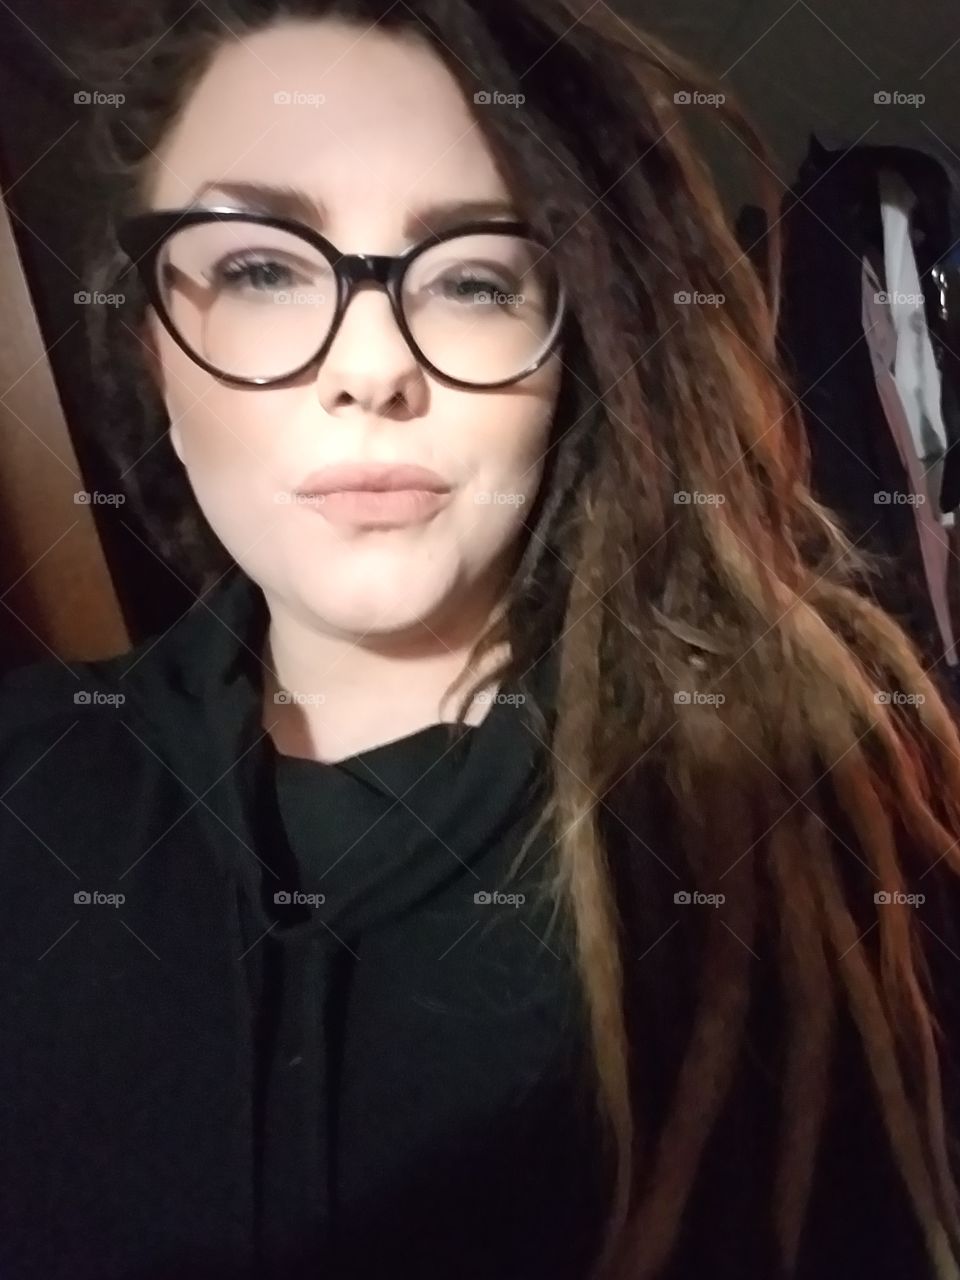 Woman in black with glasses. She is proud.